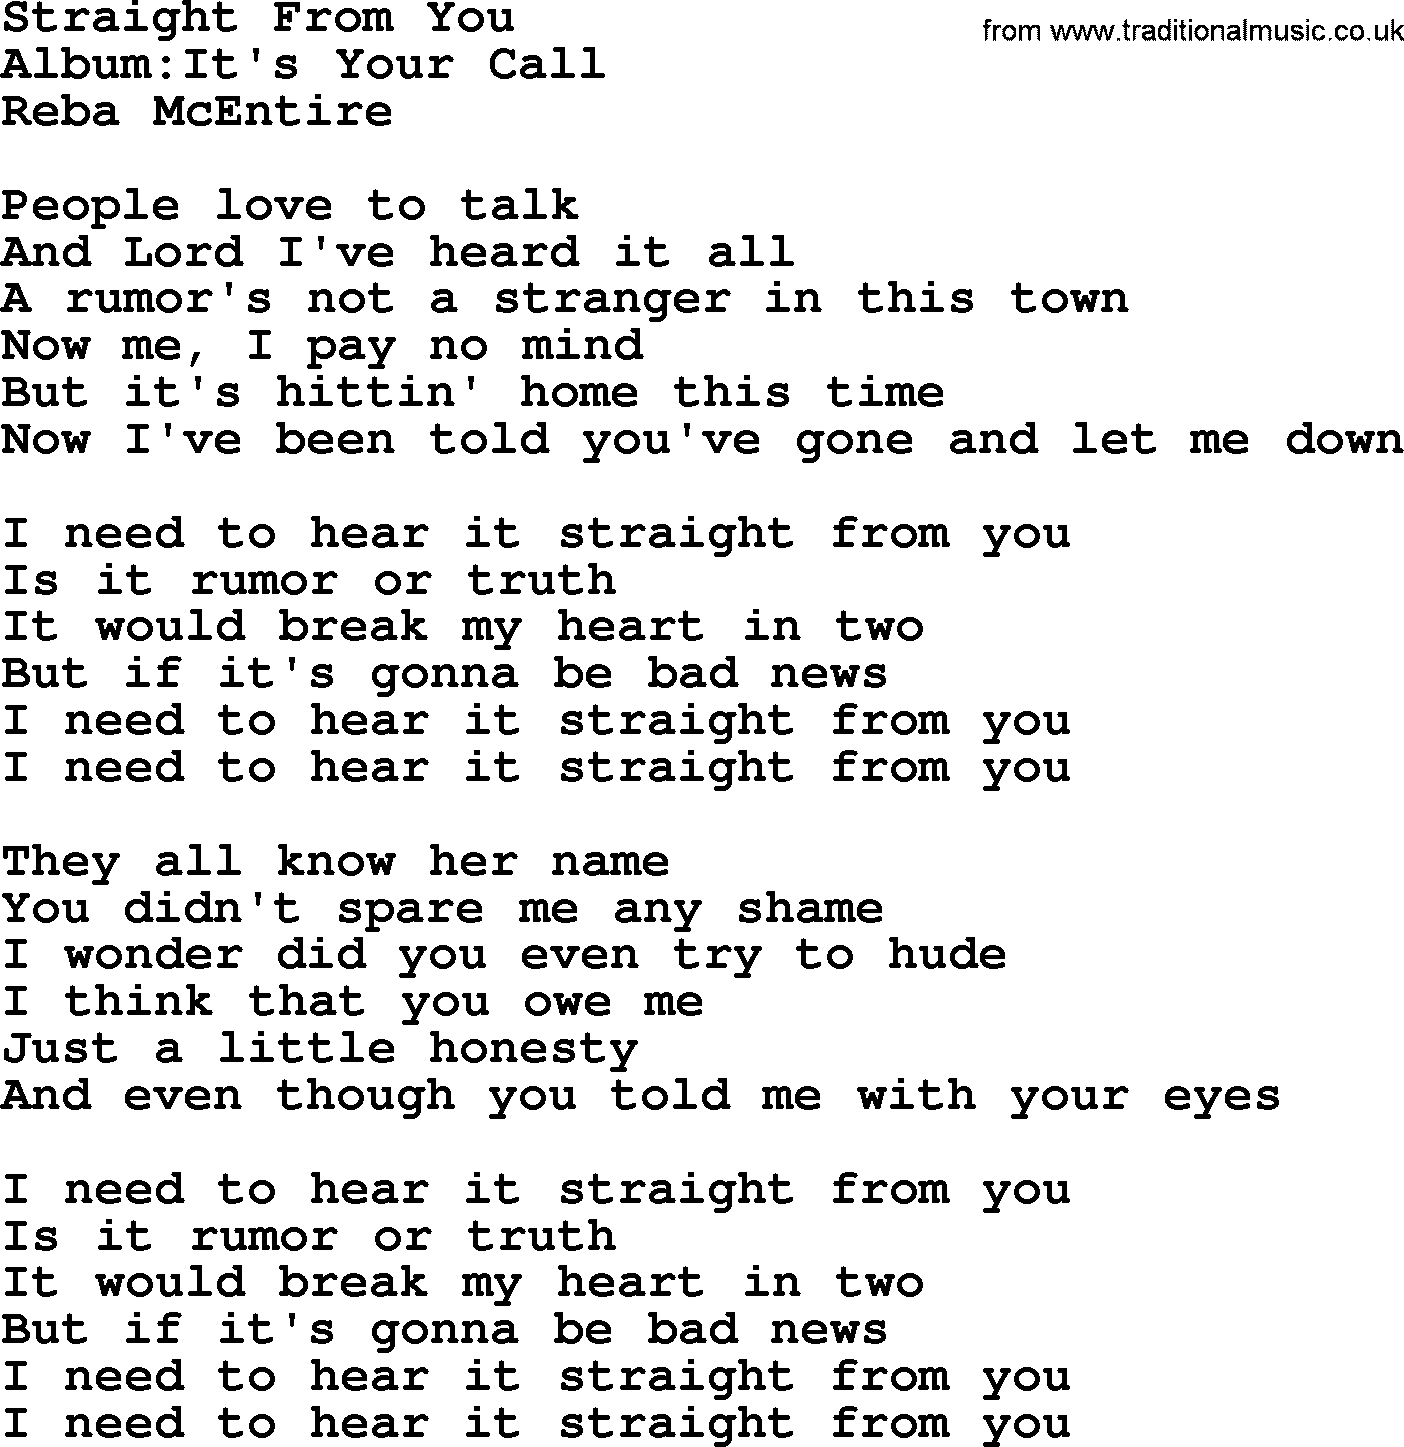 Reba McEntire song: Straight From You lyrics